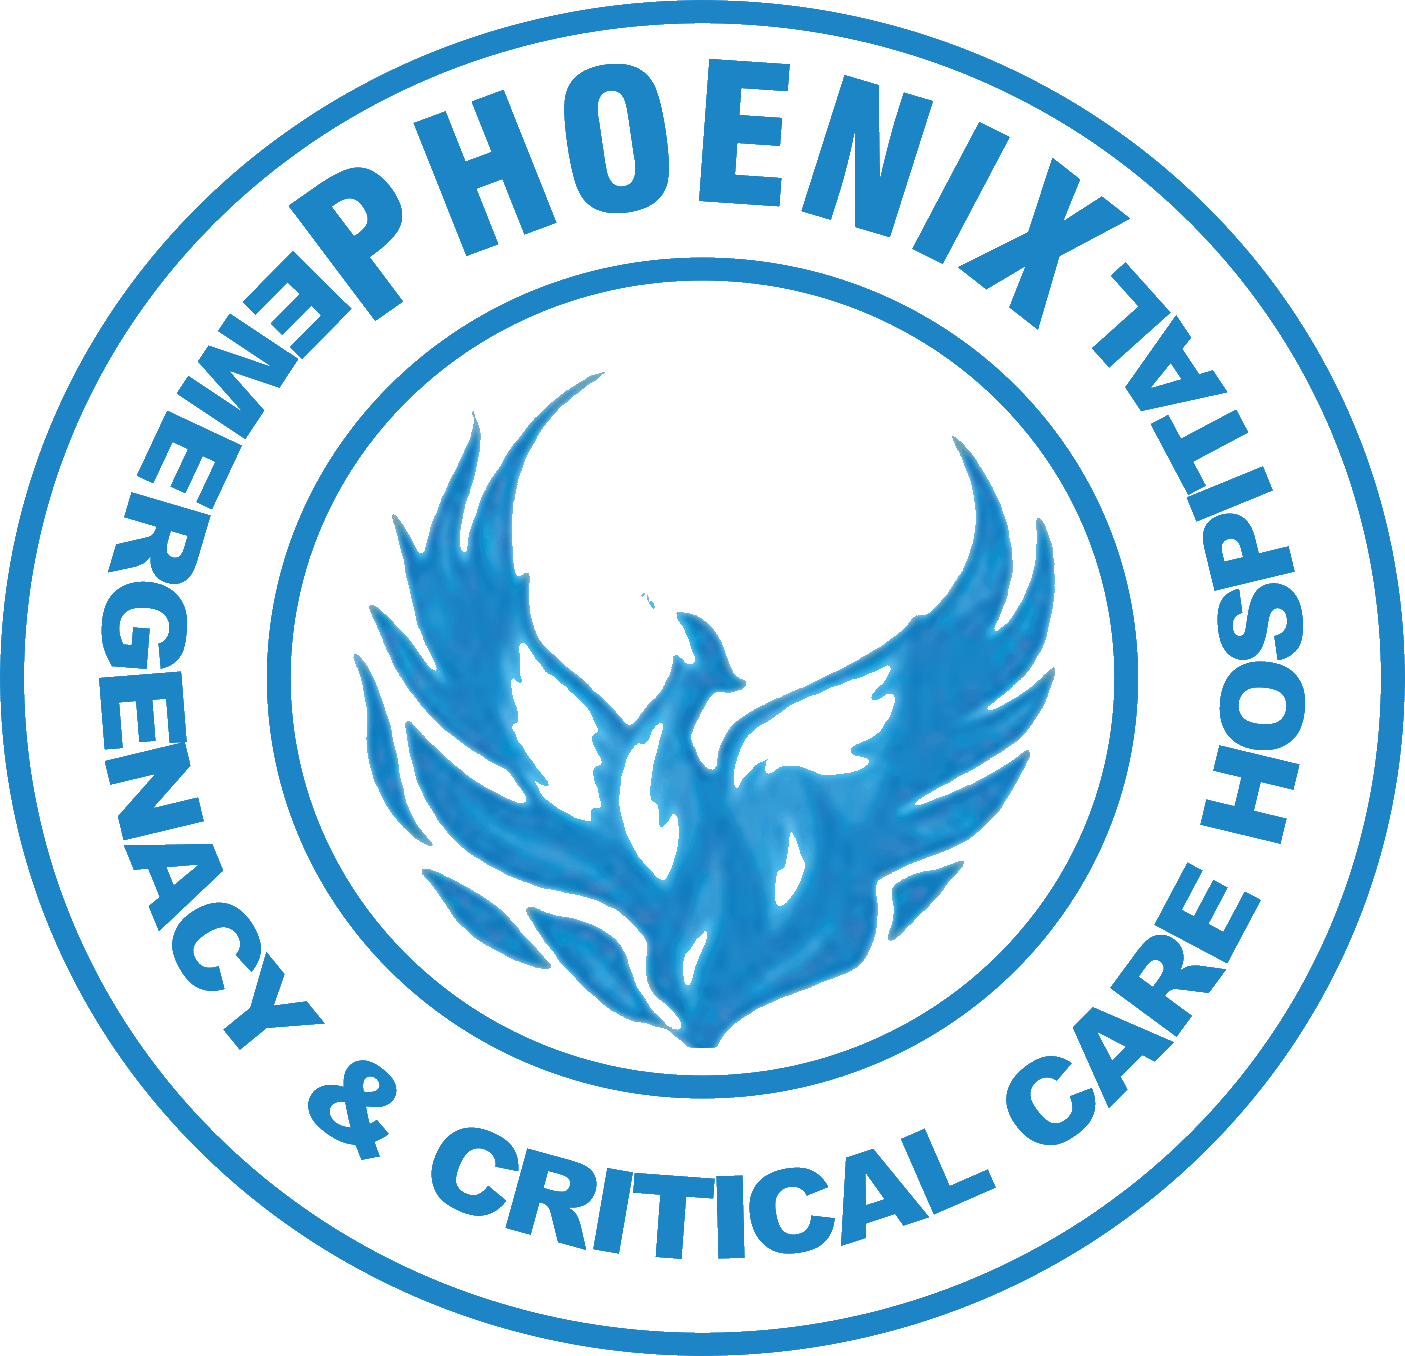 Phoenix Critical Care Hospital|Veterinary|Medical Services